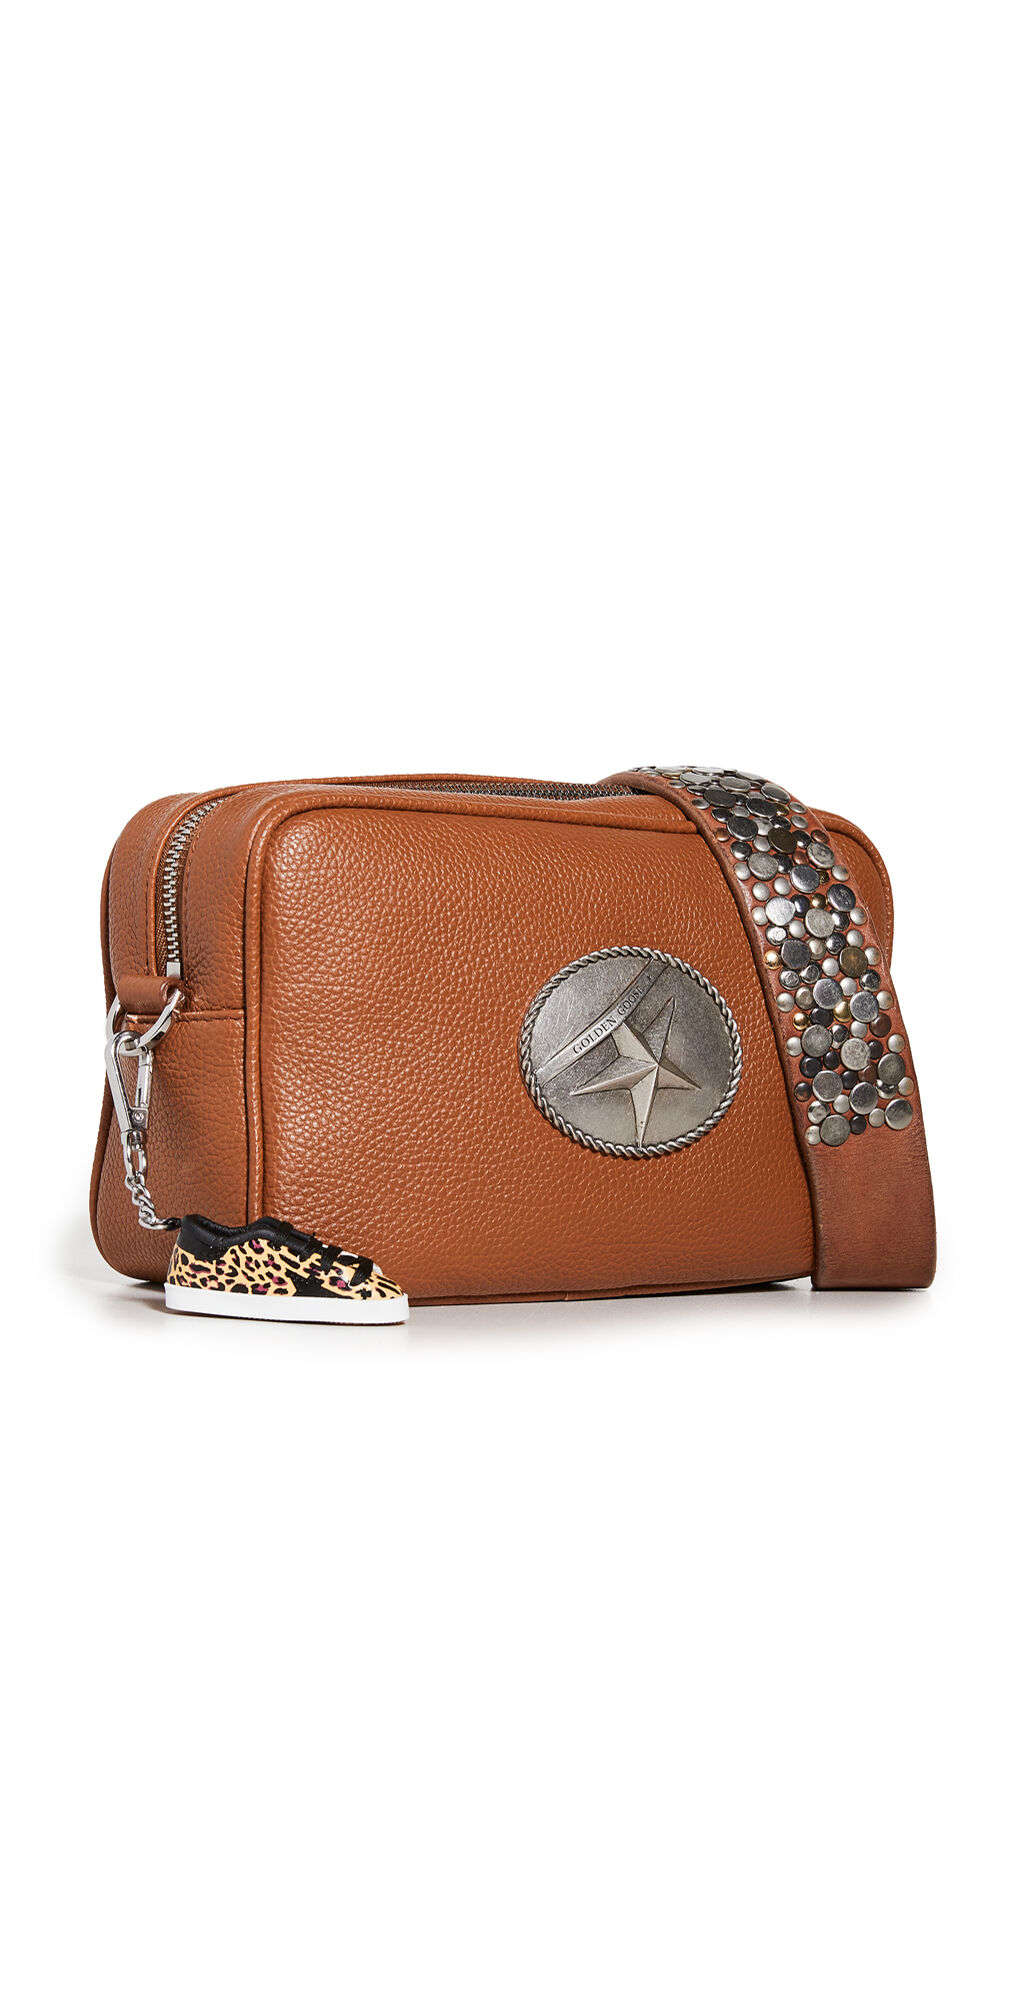 Golden Goose Studded Star Bag Cuoio One Size  Cuoio  size:One Size